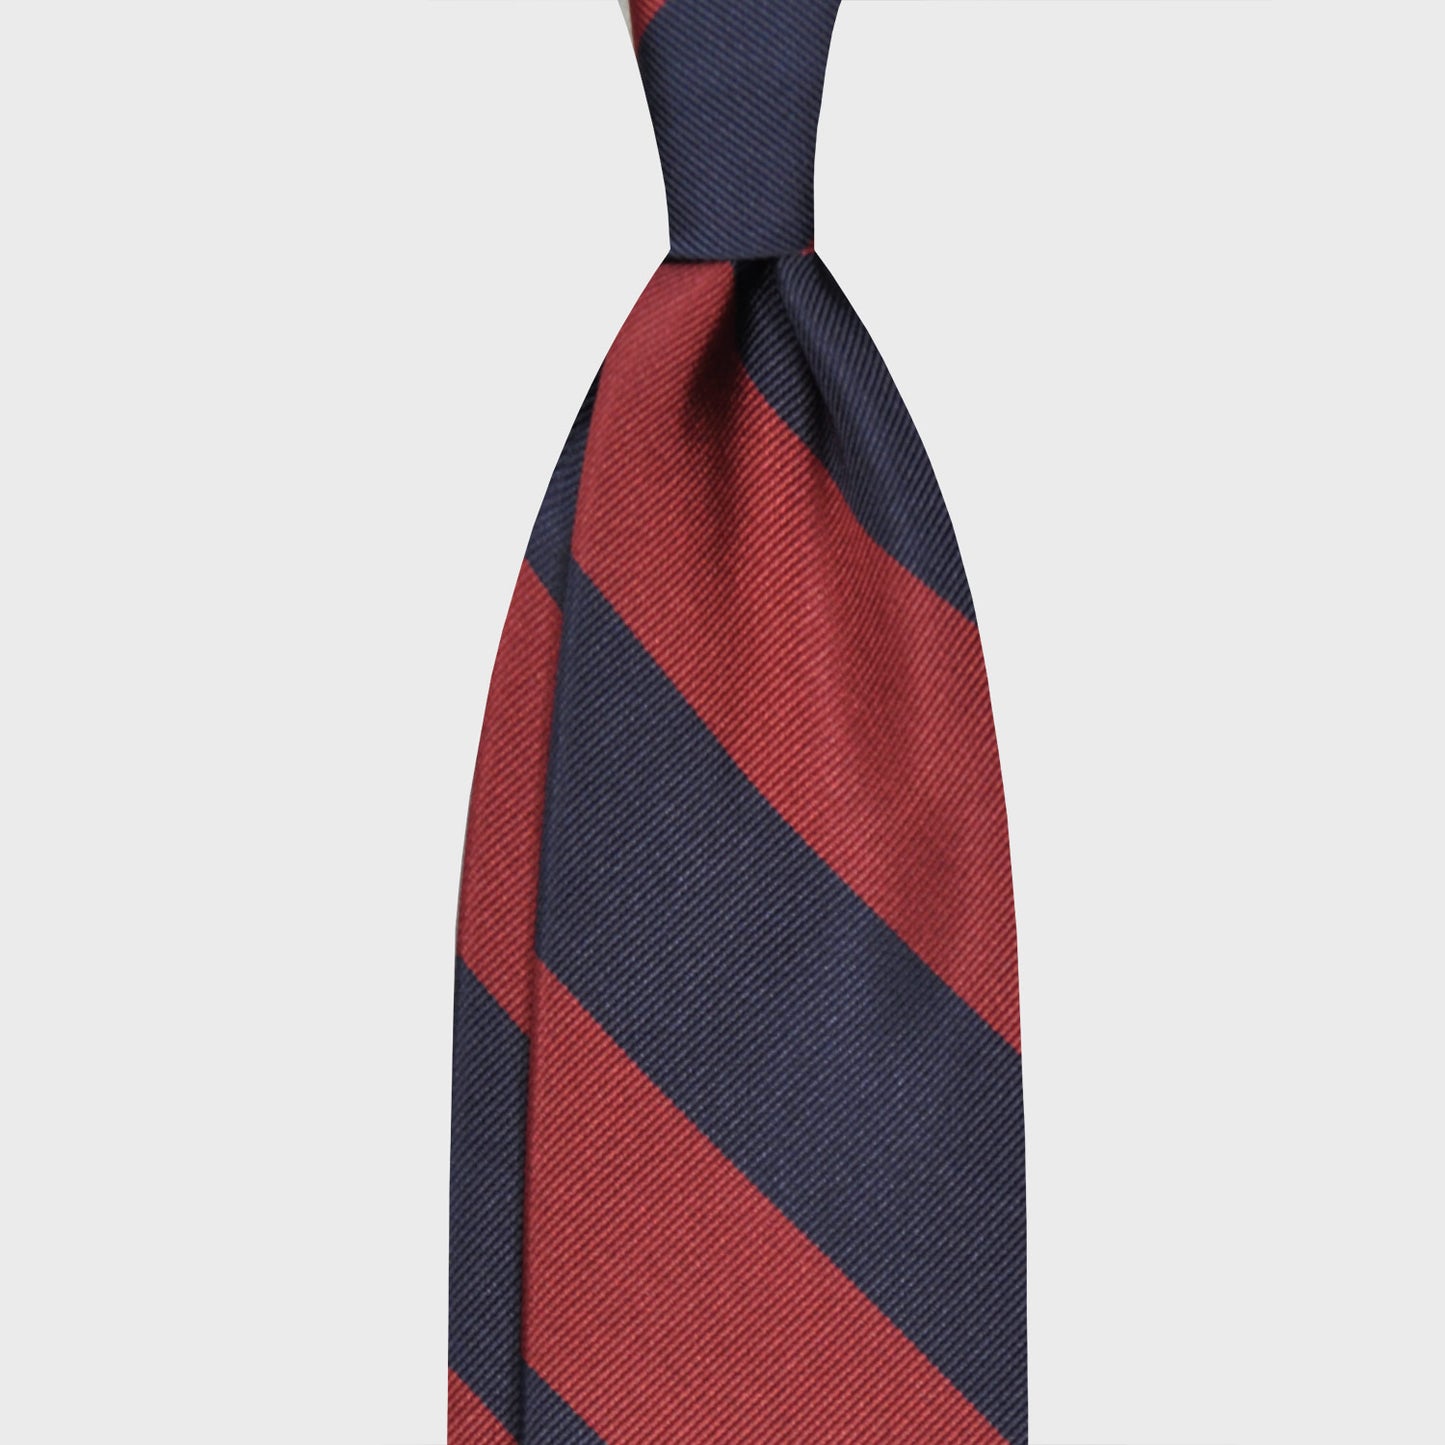 Load image into Gallery viewer, Chili Red Wide Striped Regimental Jacquard Silk Tie. Classic jacquard silk tie with wide striped chili red and navy blue, handmade in Italy by F.Marino Napoli exclusive for Wools Boutique Uomo, unlined regimental red tie 3 folds hand rolled edge.
